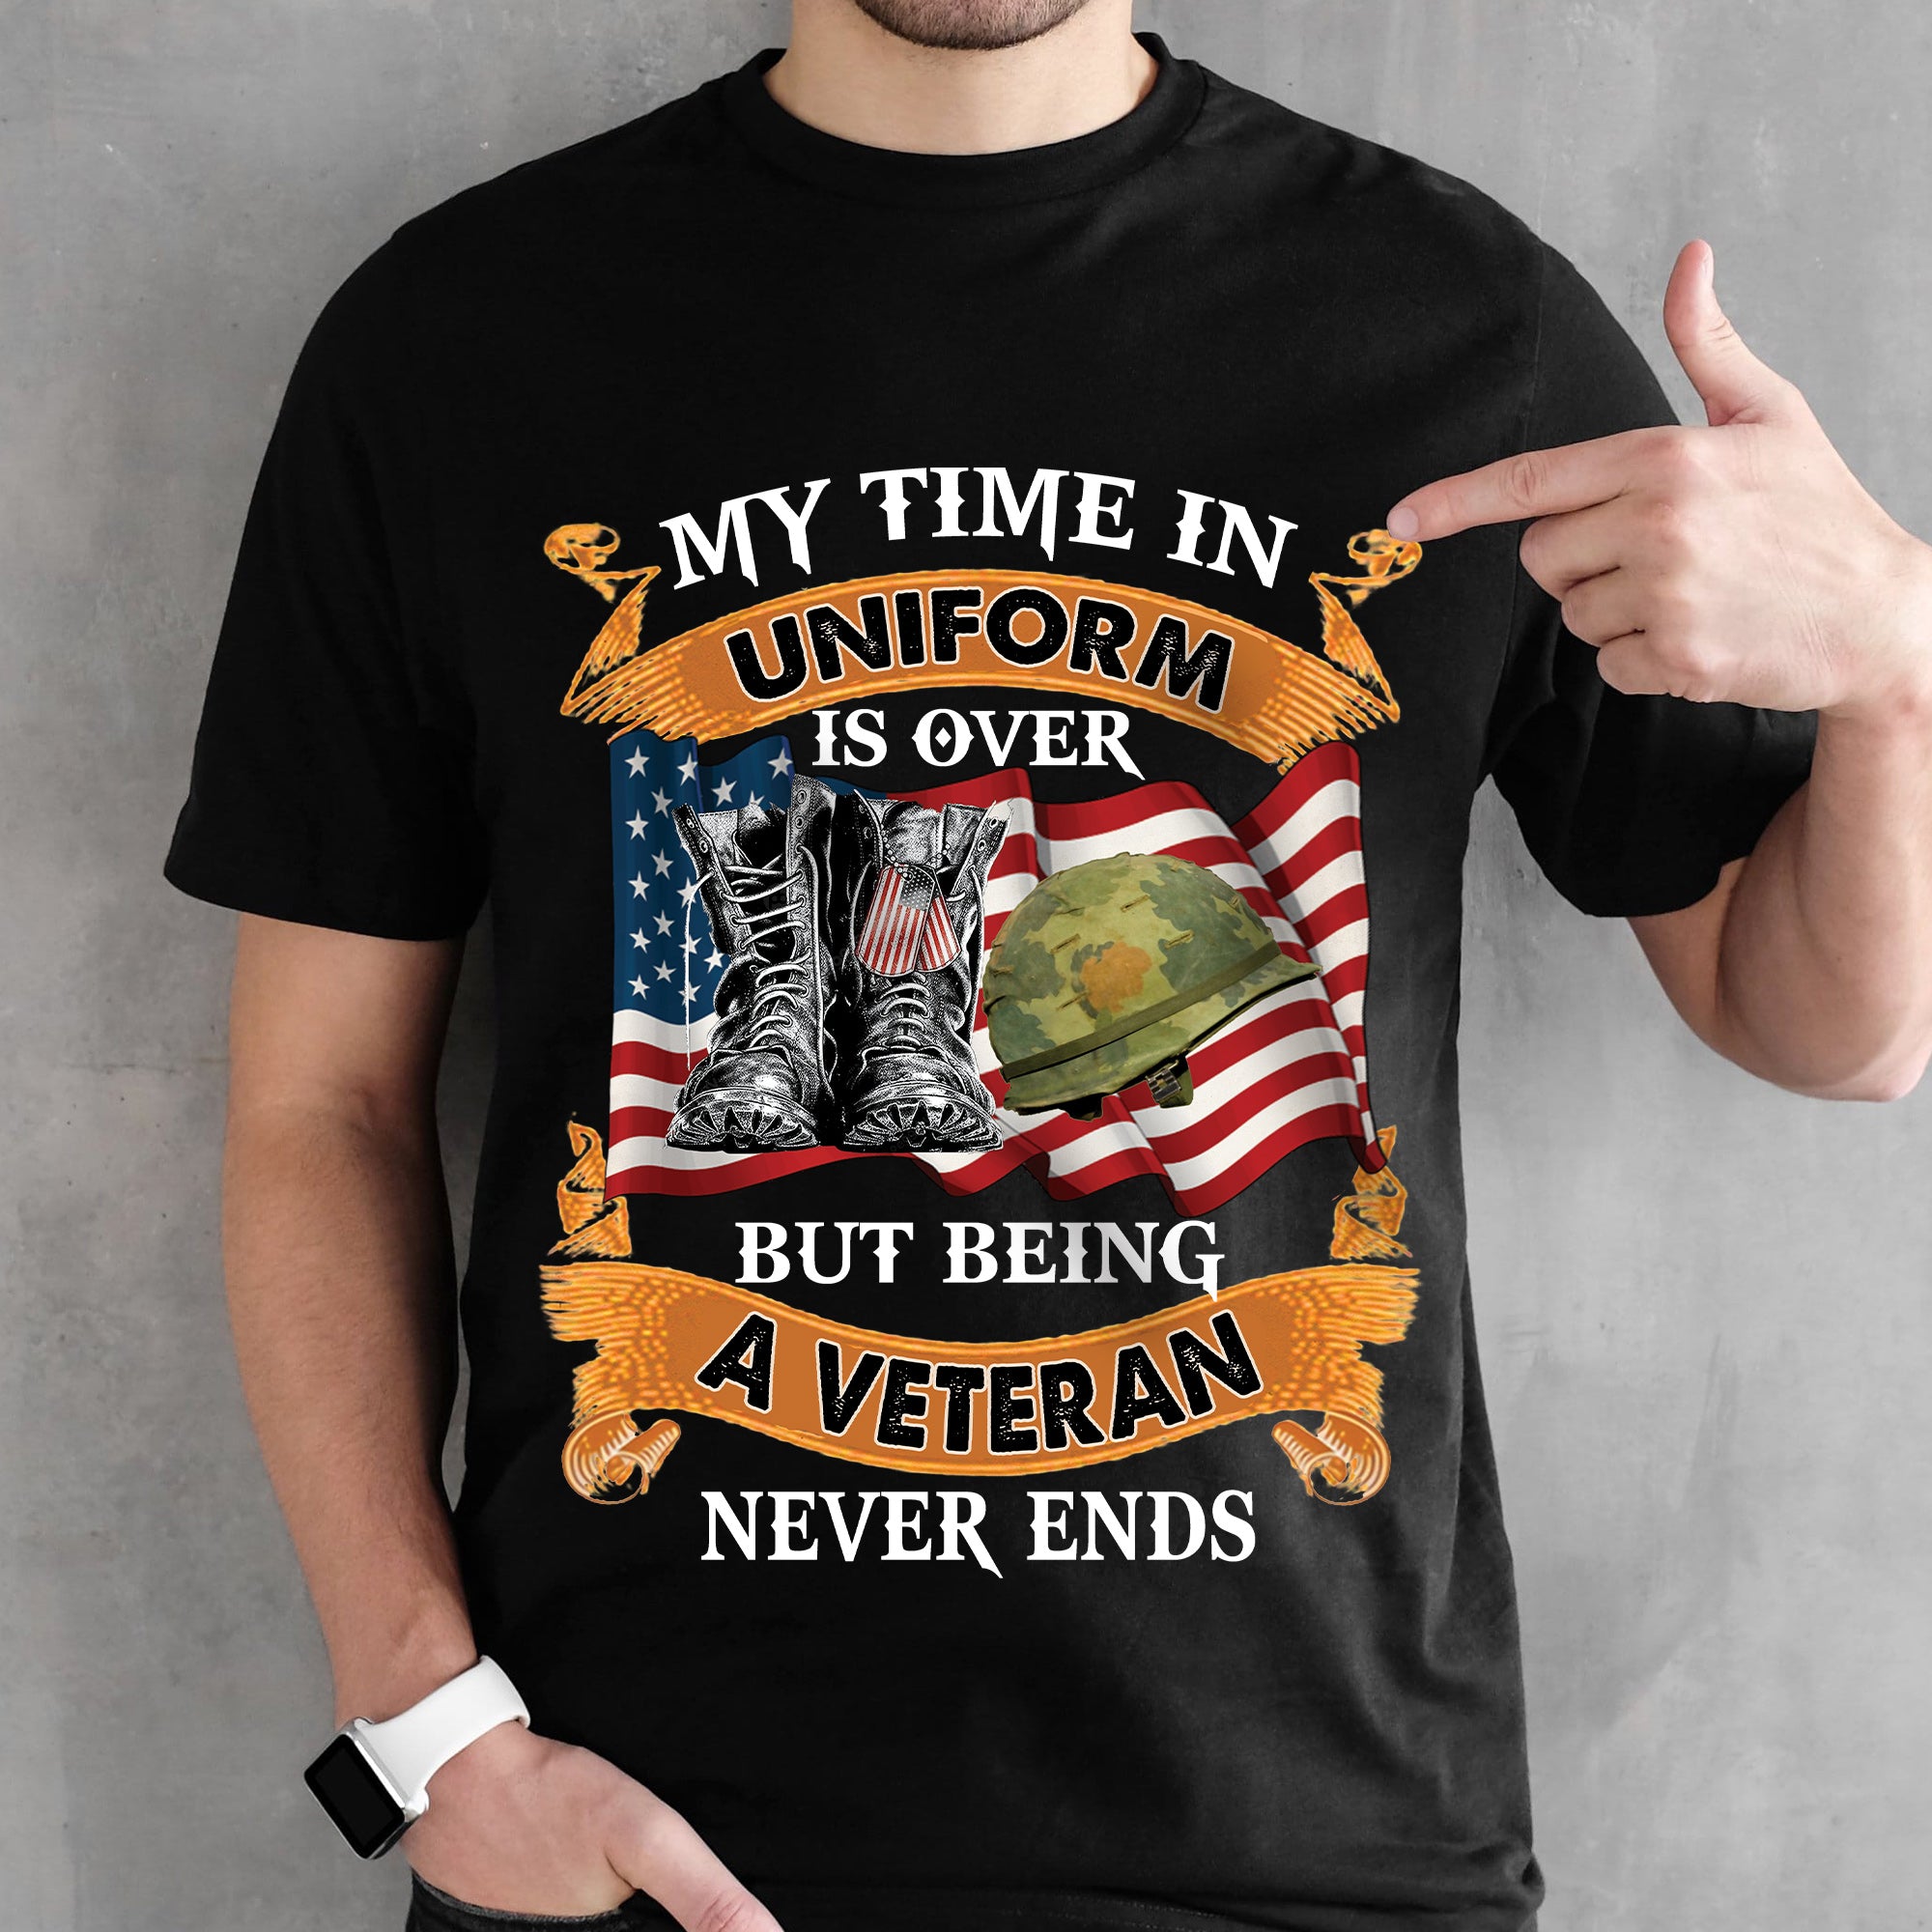 MY TIME IN UNIFORM IS OVER BUT BEING A VETERAN NEVER ENDS T-SHIRT